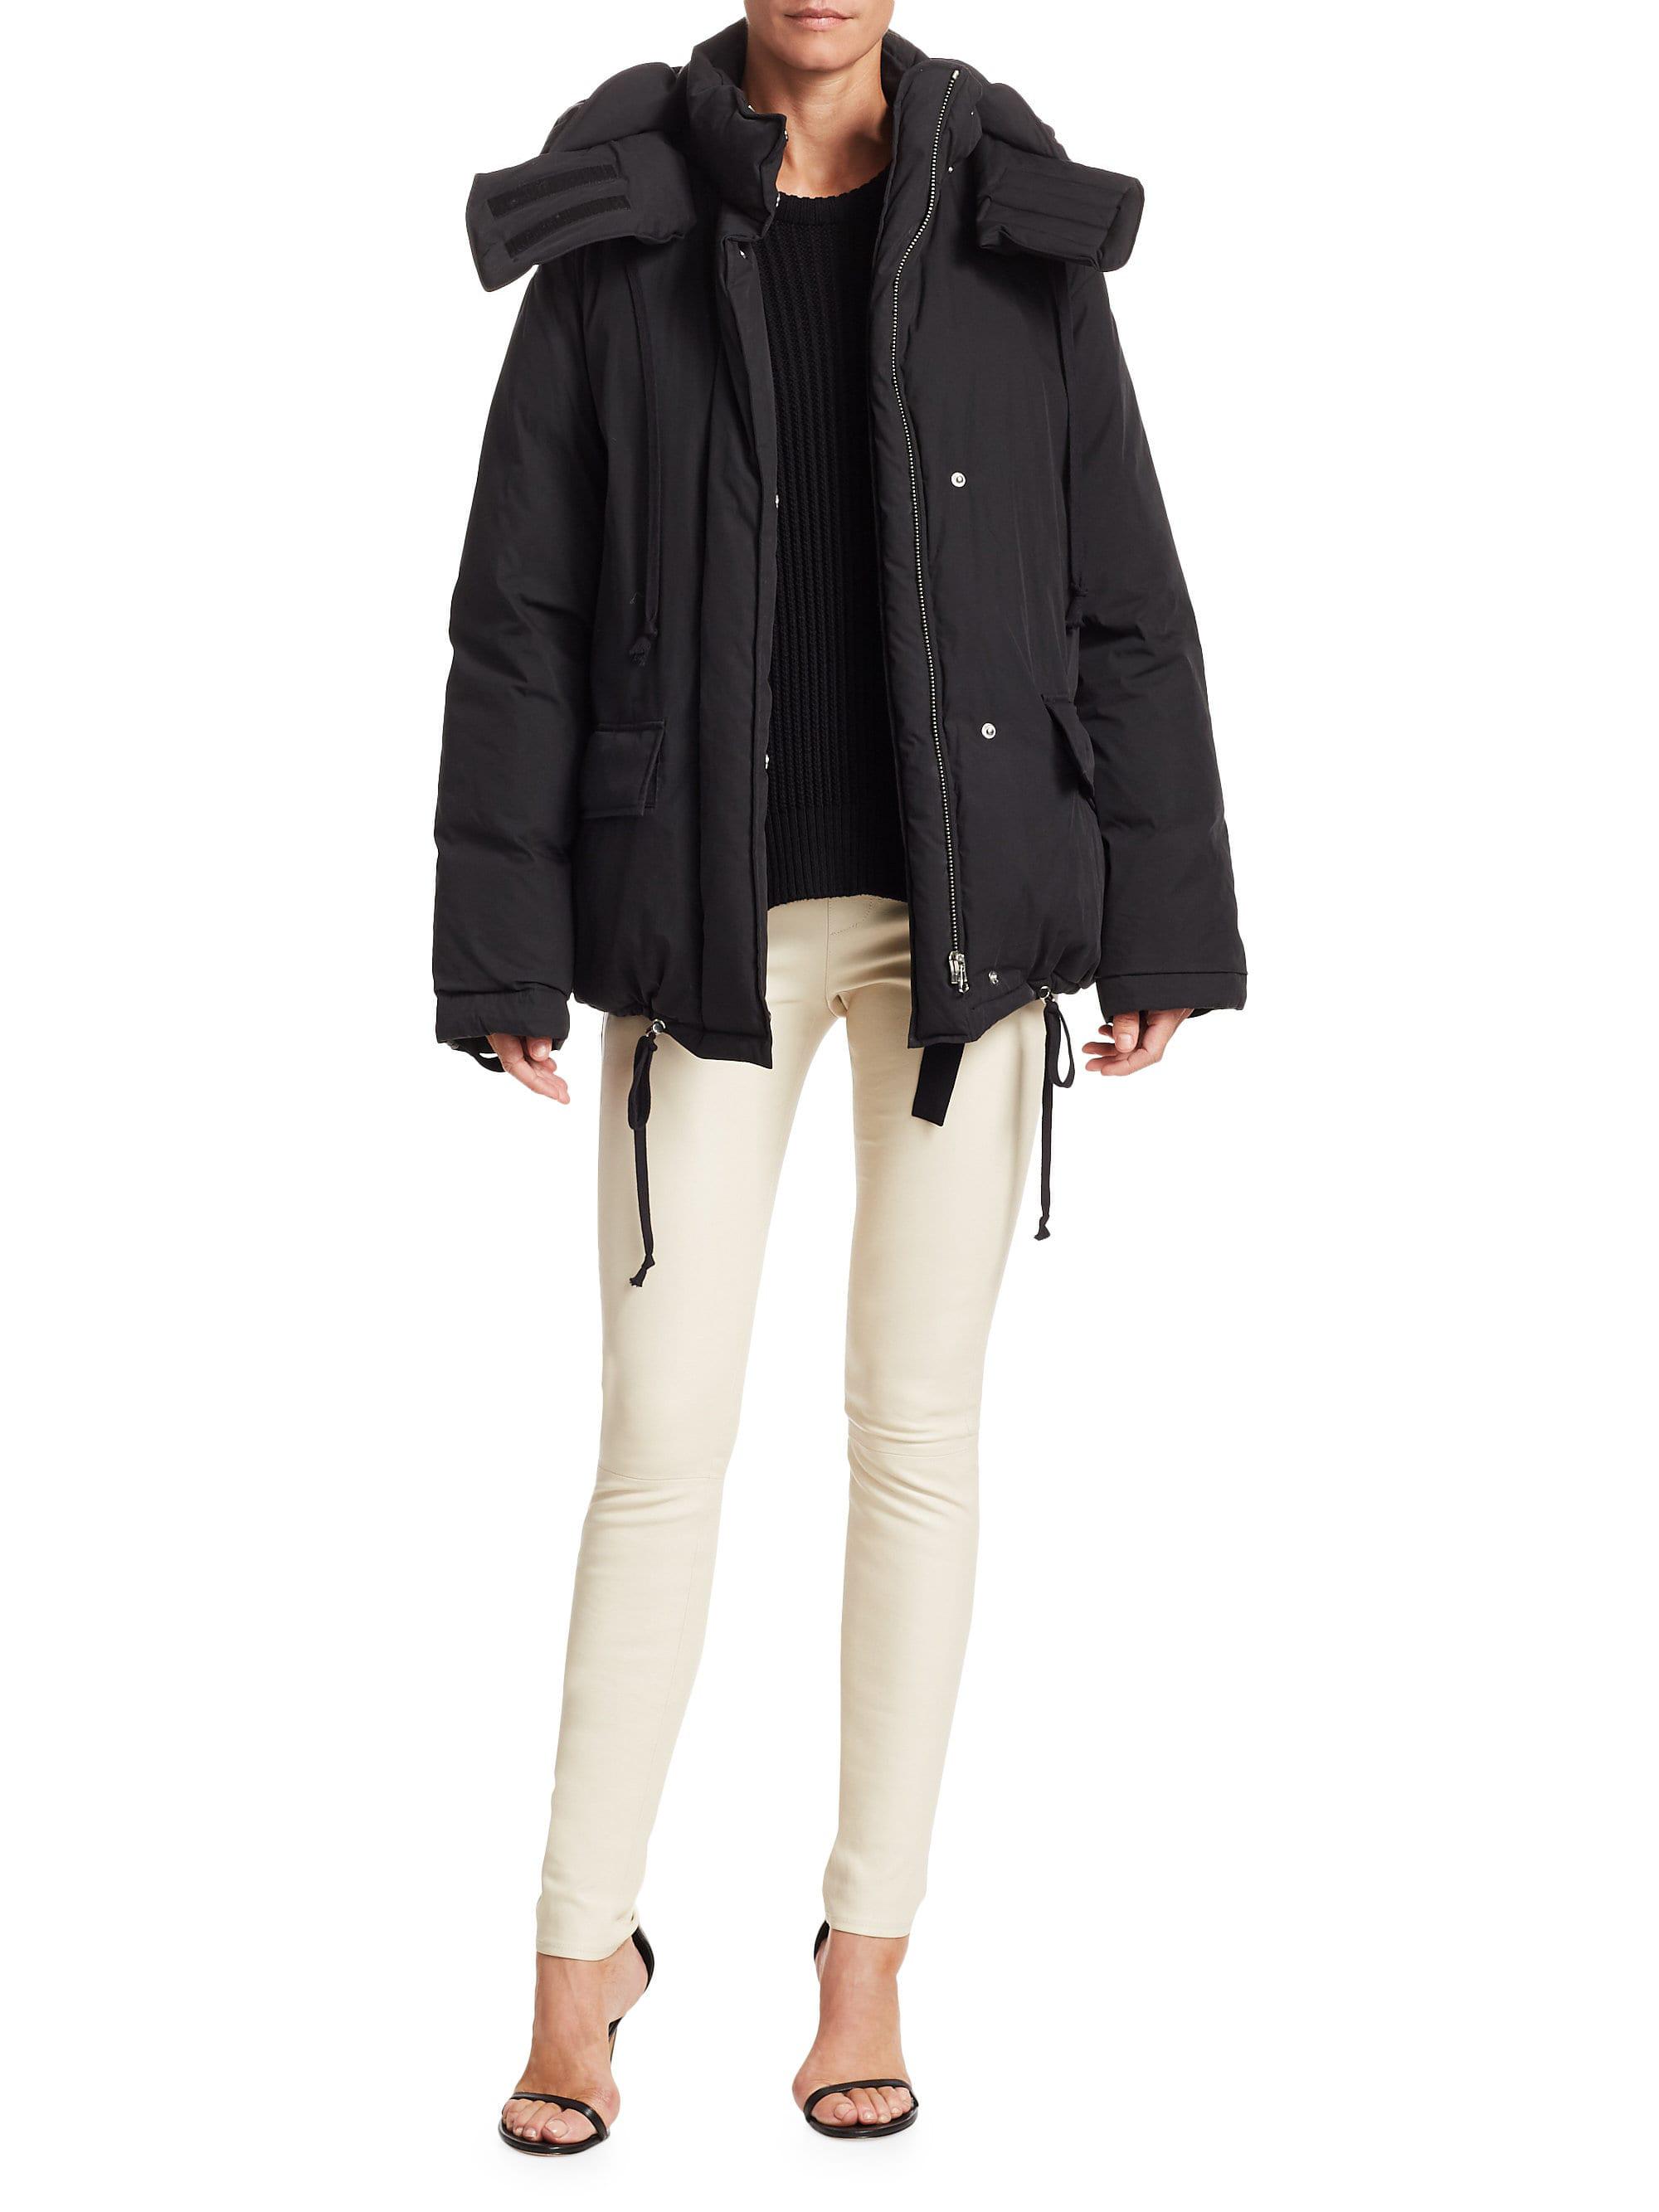 Helmut Lang Goose Down & Feather Fill Puffer Jacket in Black - Lyst